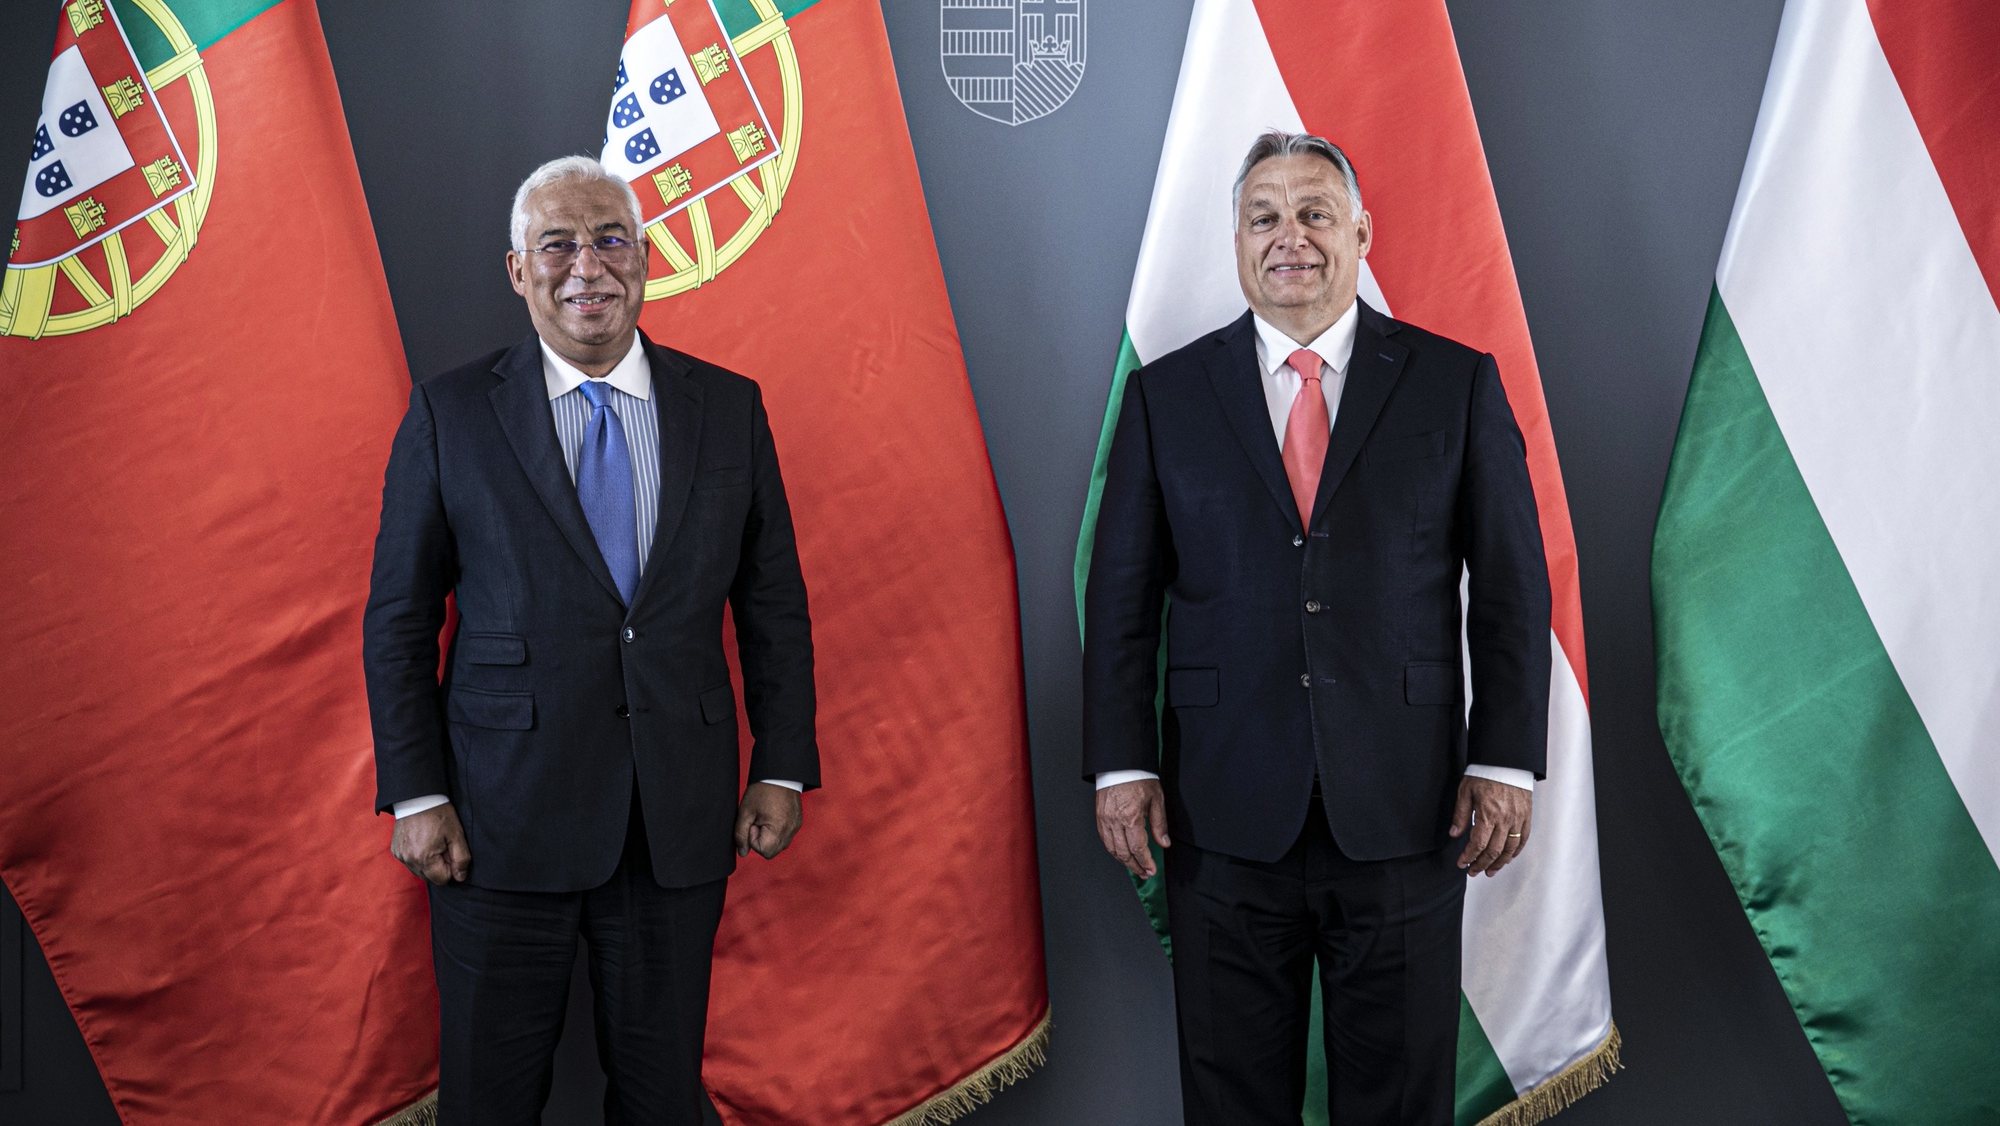 epa08545305 A handout photo made available by the Hungarian Prime Minister&#039;s Press Office shows Hungarian Prime Minister Viktor Orban (R) and his Portuguese counterpart Antonio Costa (L) posing during their meeting in Orban&#039;s office in Budapest, Hungary, 14 July 2020.  EPA/ZOLTAN FISCHER / HANDOUT  HANDOUT EDITORIAL USE ONLY/NO SALES